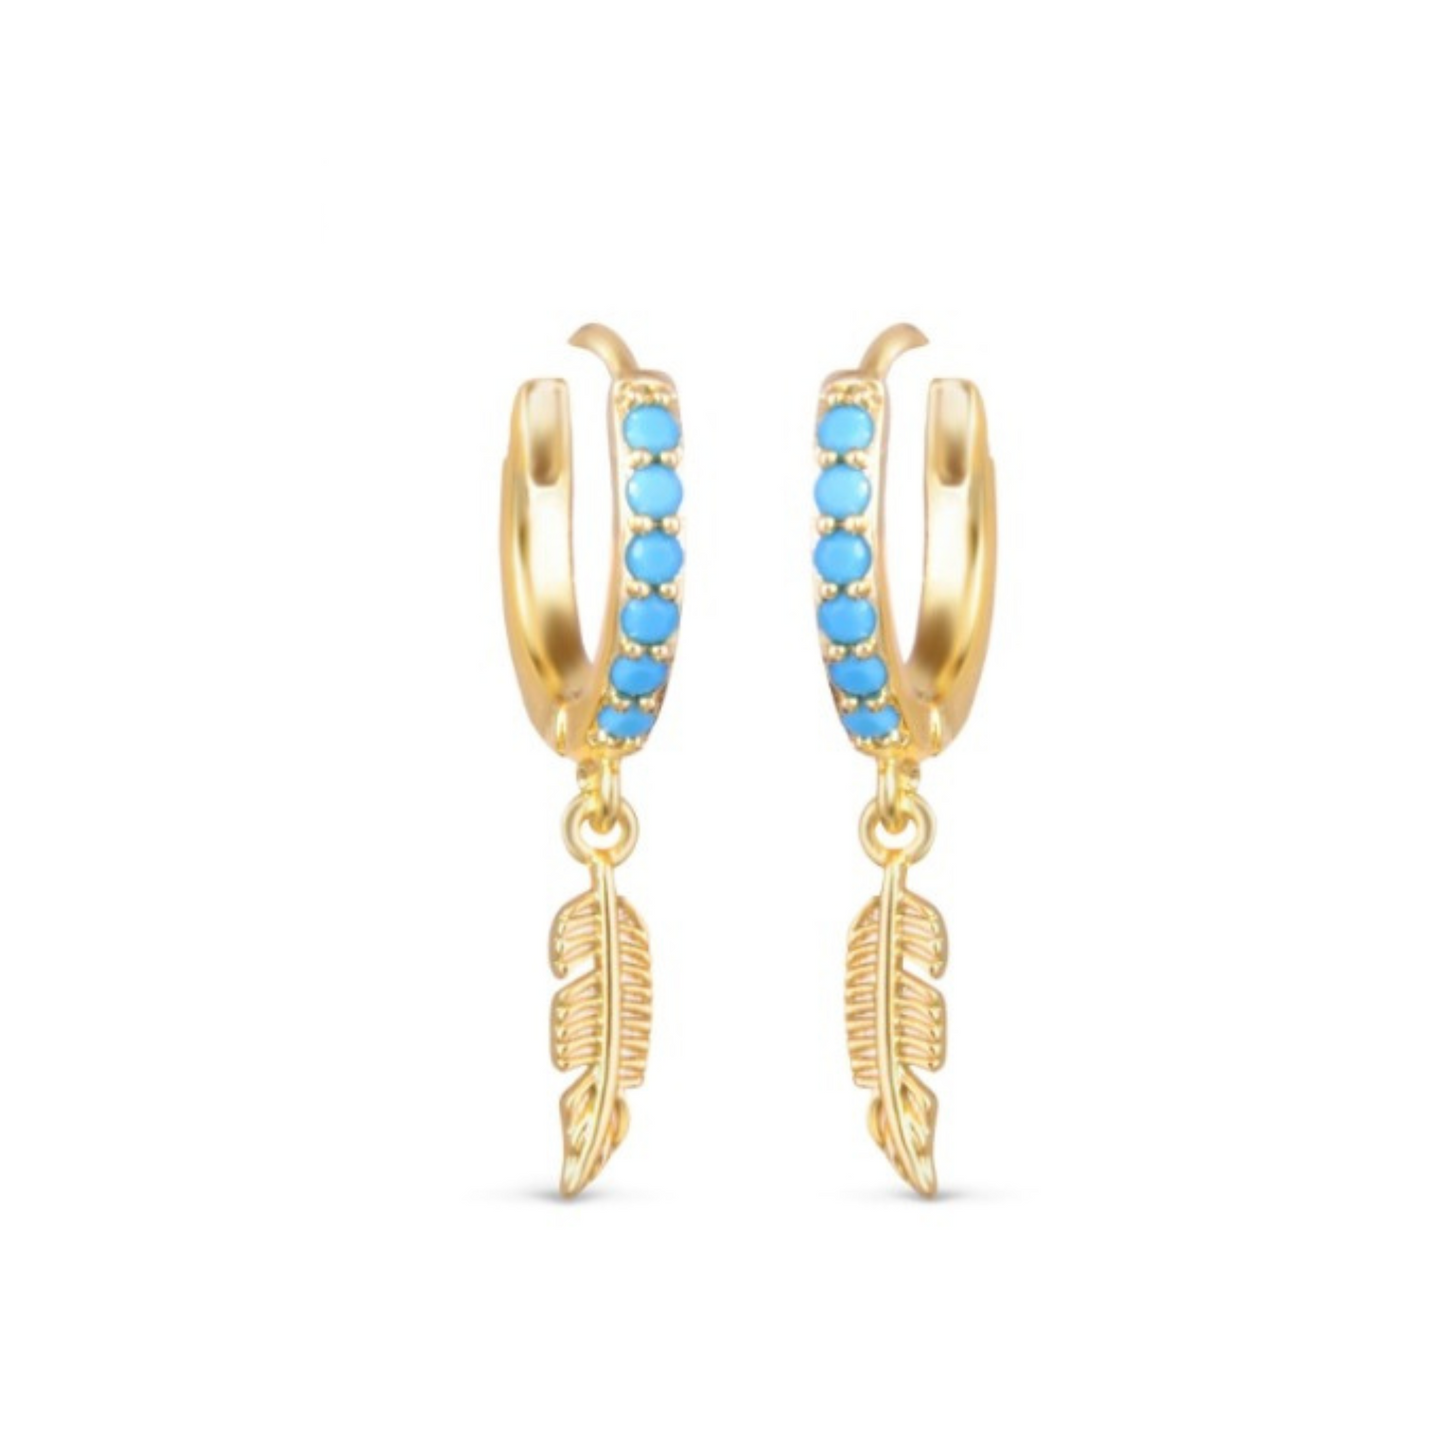 Up your style game with these Blue Stone Feather Earrings from Amanda Blu. These dainty 18K gold dipped huggie earrings feature bright blue cubic zirconia stones along the hoop and dangling gold feathers. You're sure to make a statement with these gorgeous earrings!